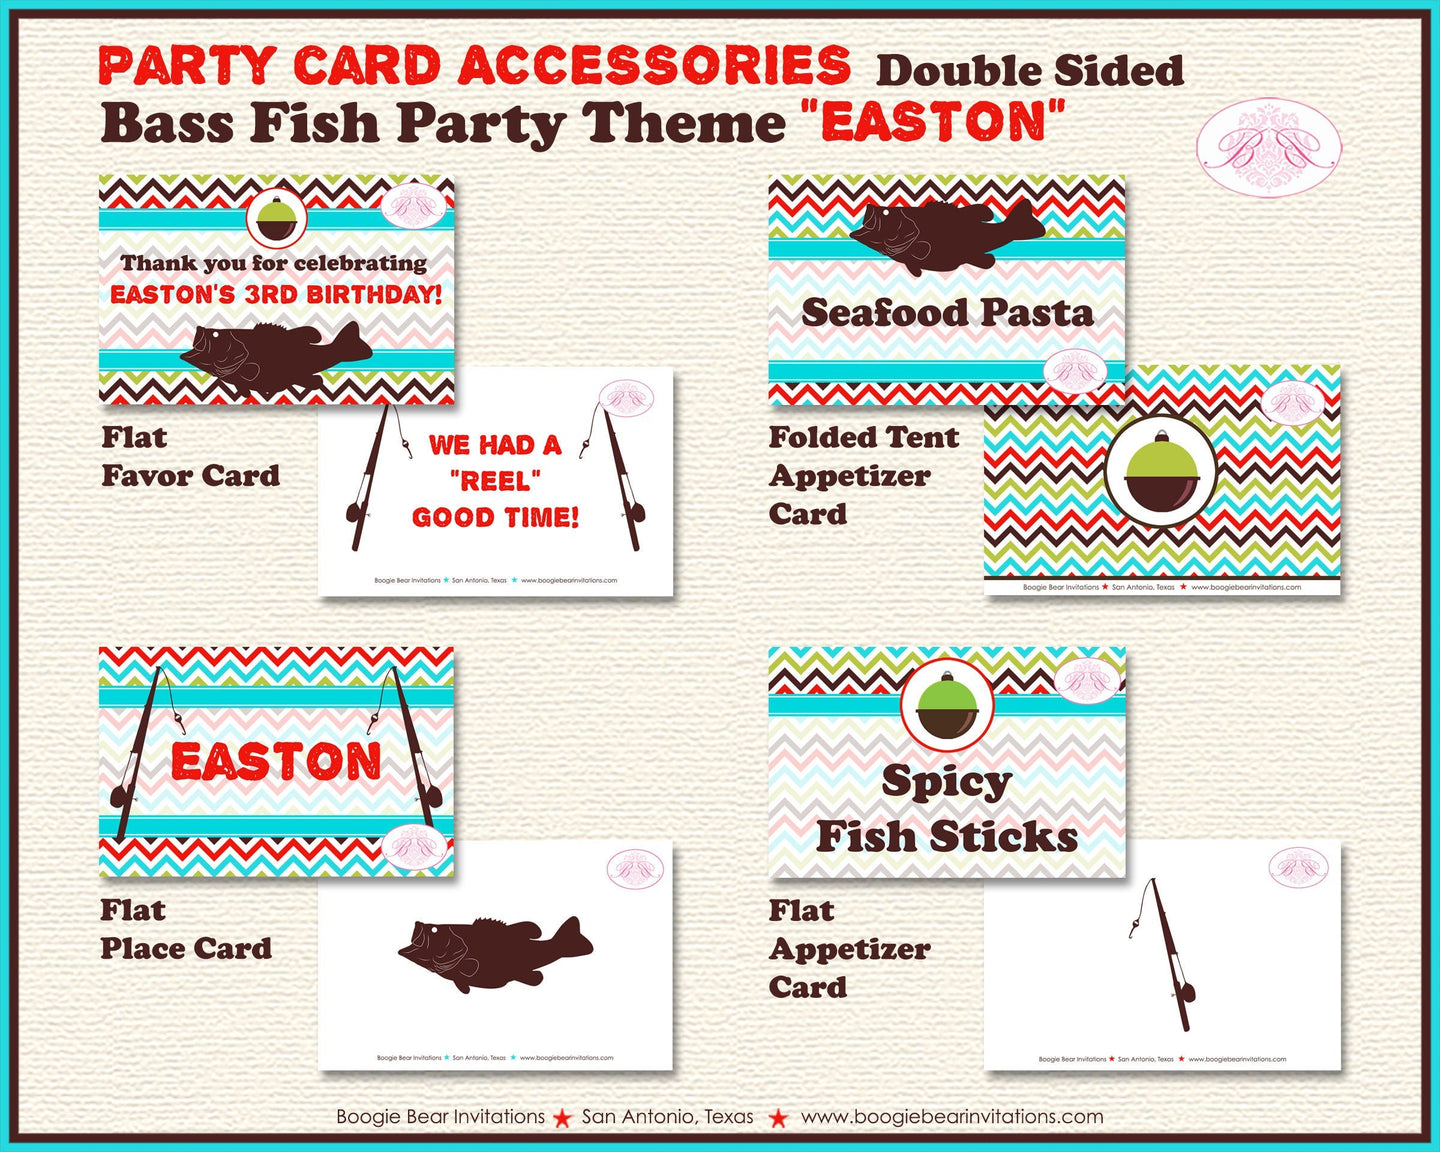 Bass Fish Birthday Favor Party Card Tent Place Food Appetizer Folded Tag Fishing Rod Pole Reel Boy Girl Boogie Bear Invitations Easton Theme